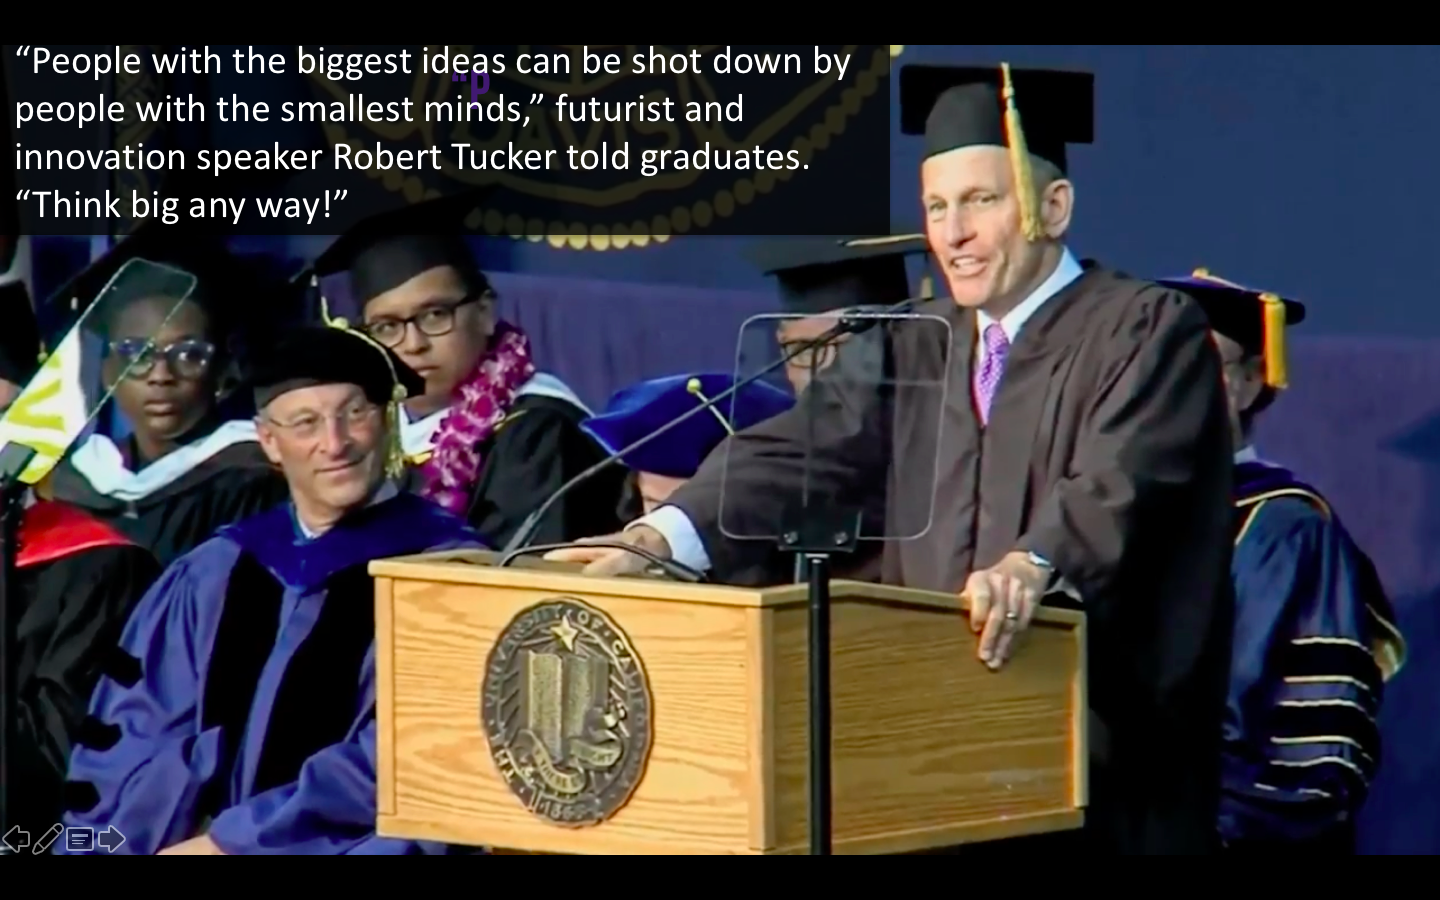 Finally, A Commencement Speech About Innovation and Creativity